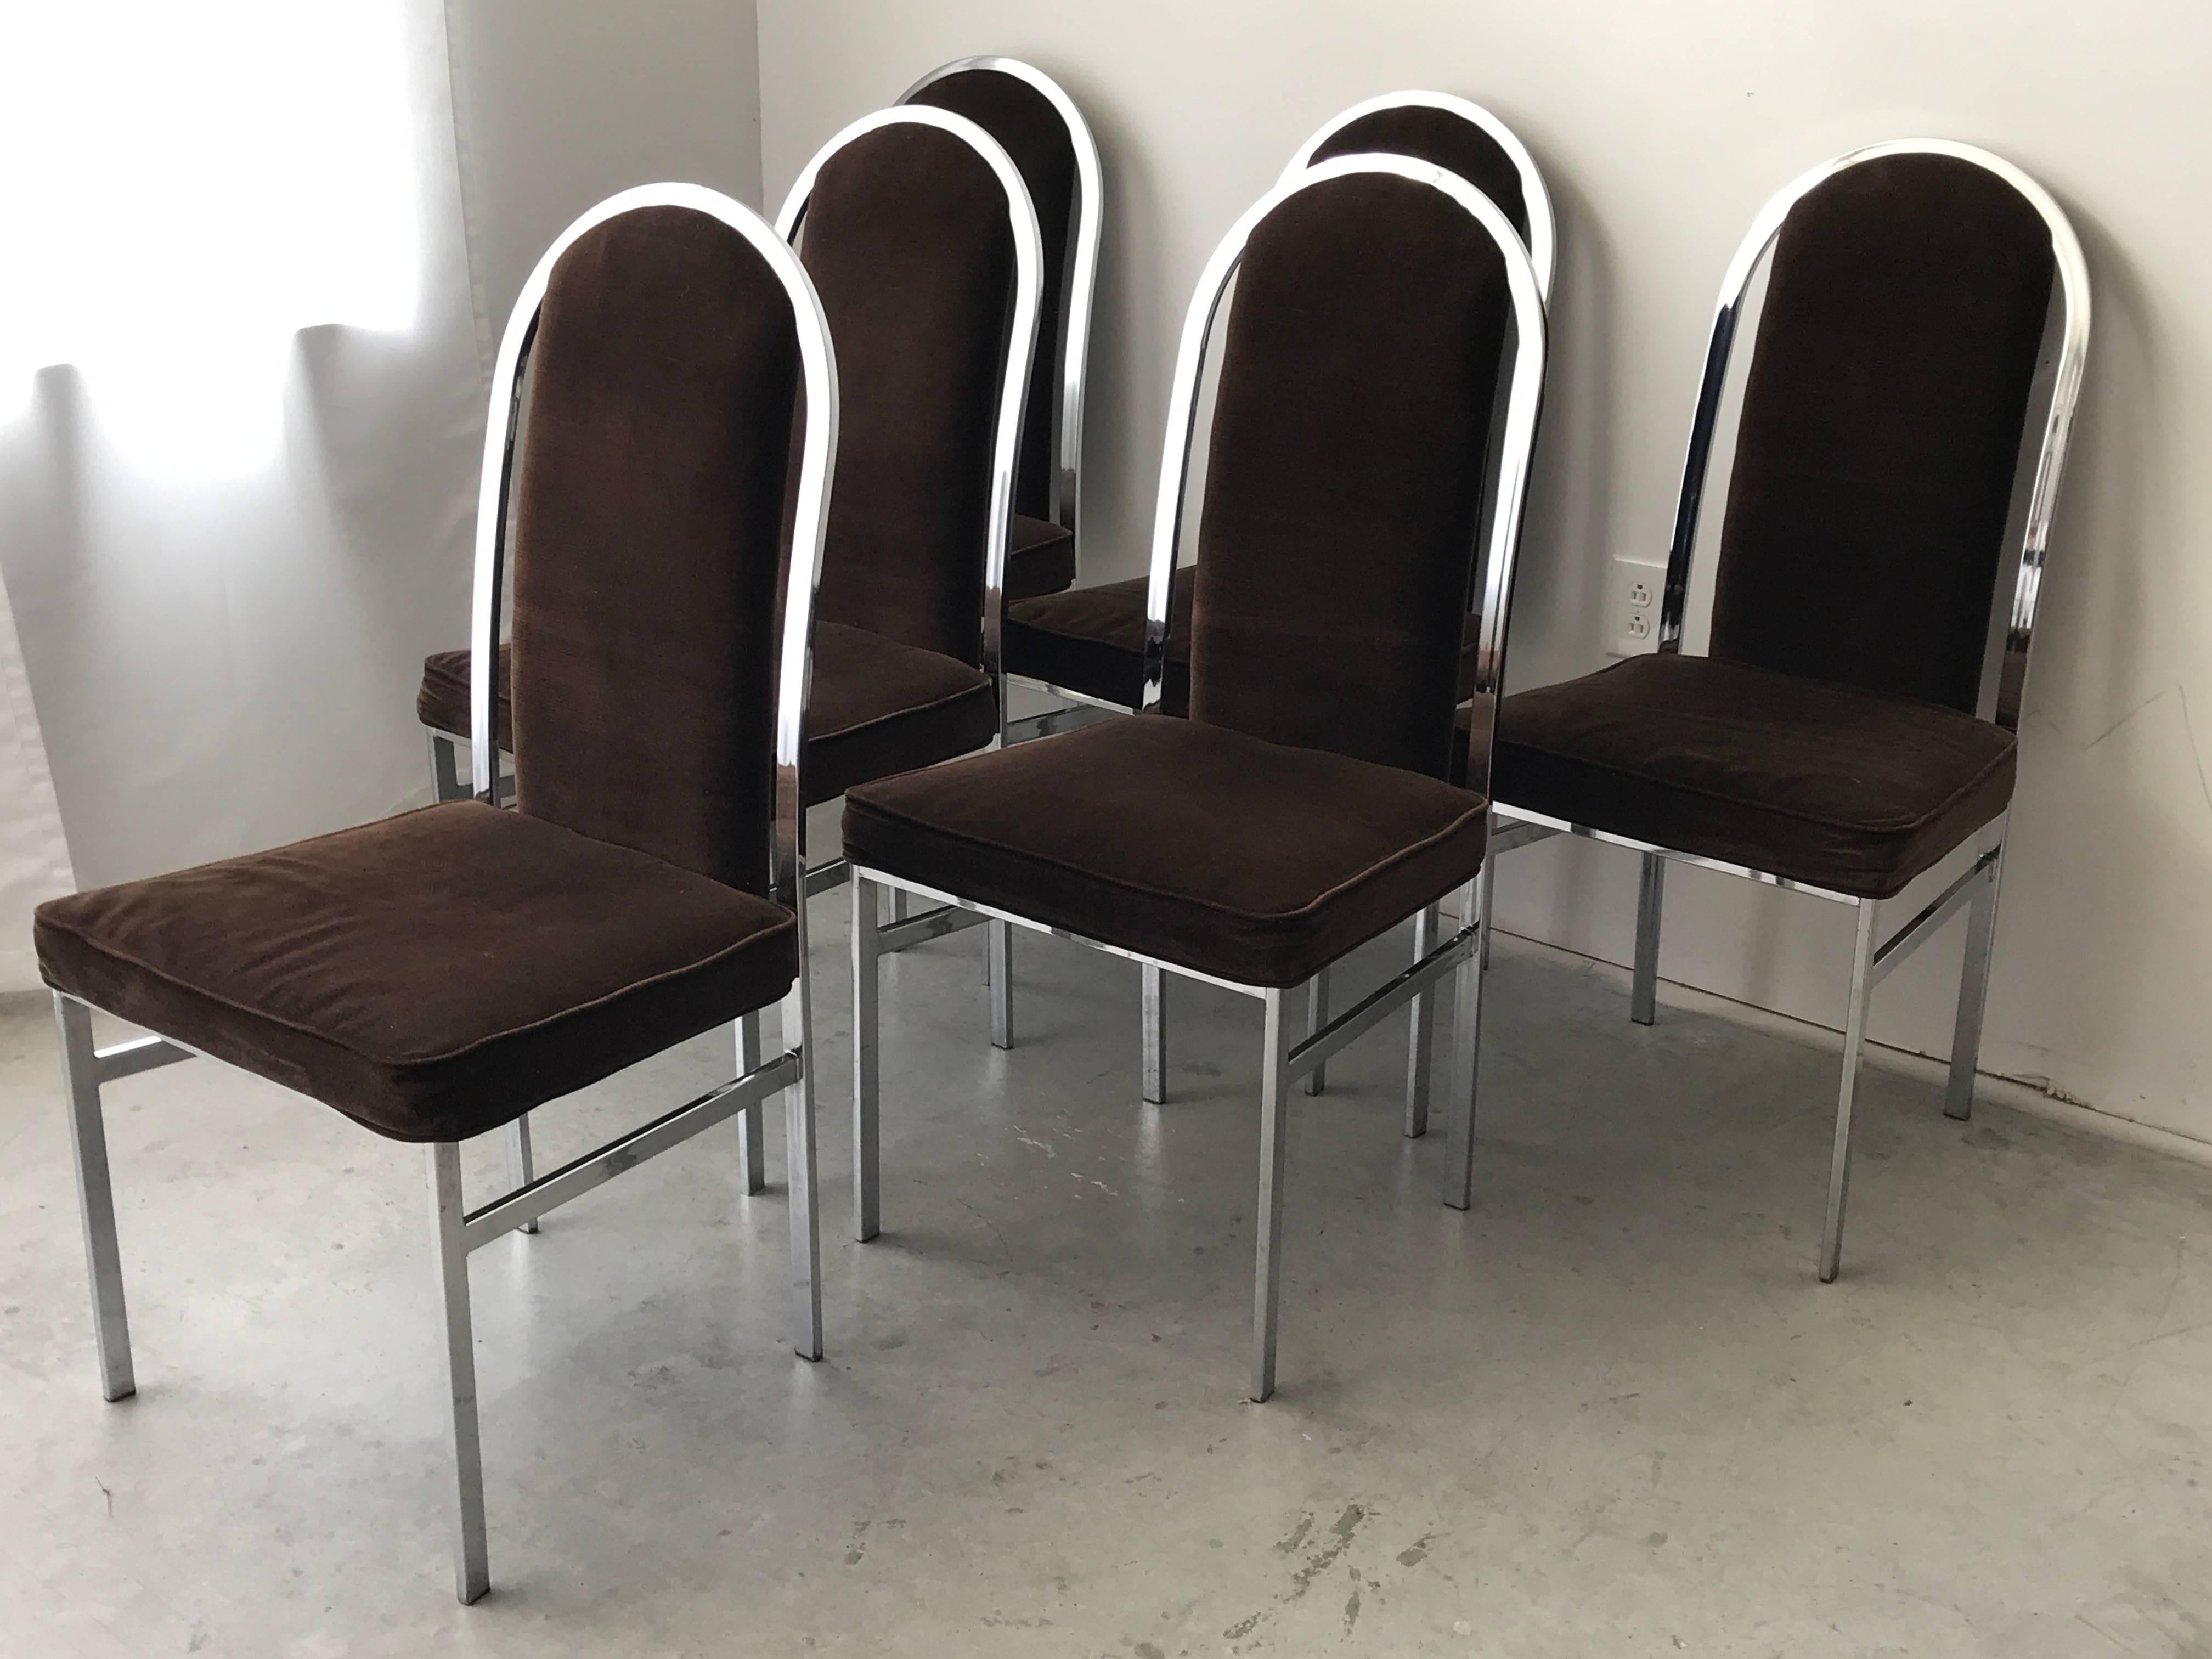 Offered is a gorgeous, set of six, 1960s Milo Baughman style chrome dining chairs by Samton. Upholstered in a chocolate-brown velvet. Fabric and foam are in good condition, minor wear consistent with age. Chrome frame is in excellent condition. Made